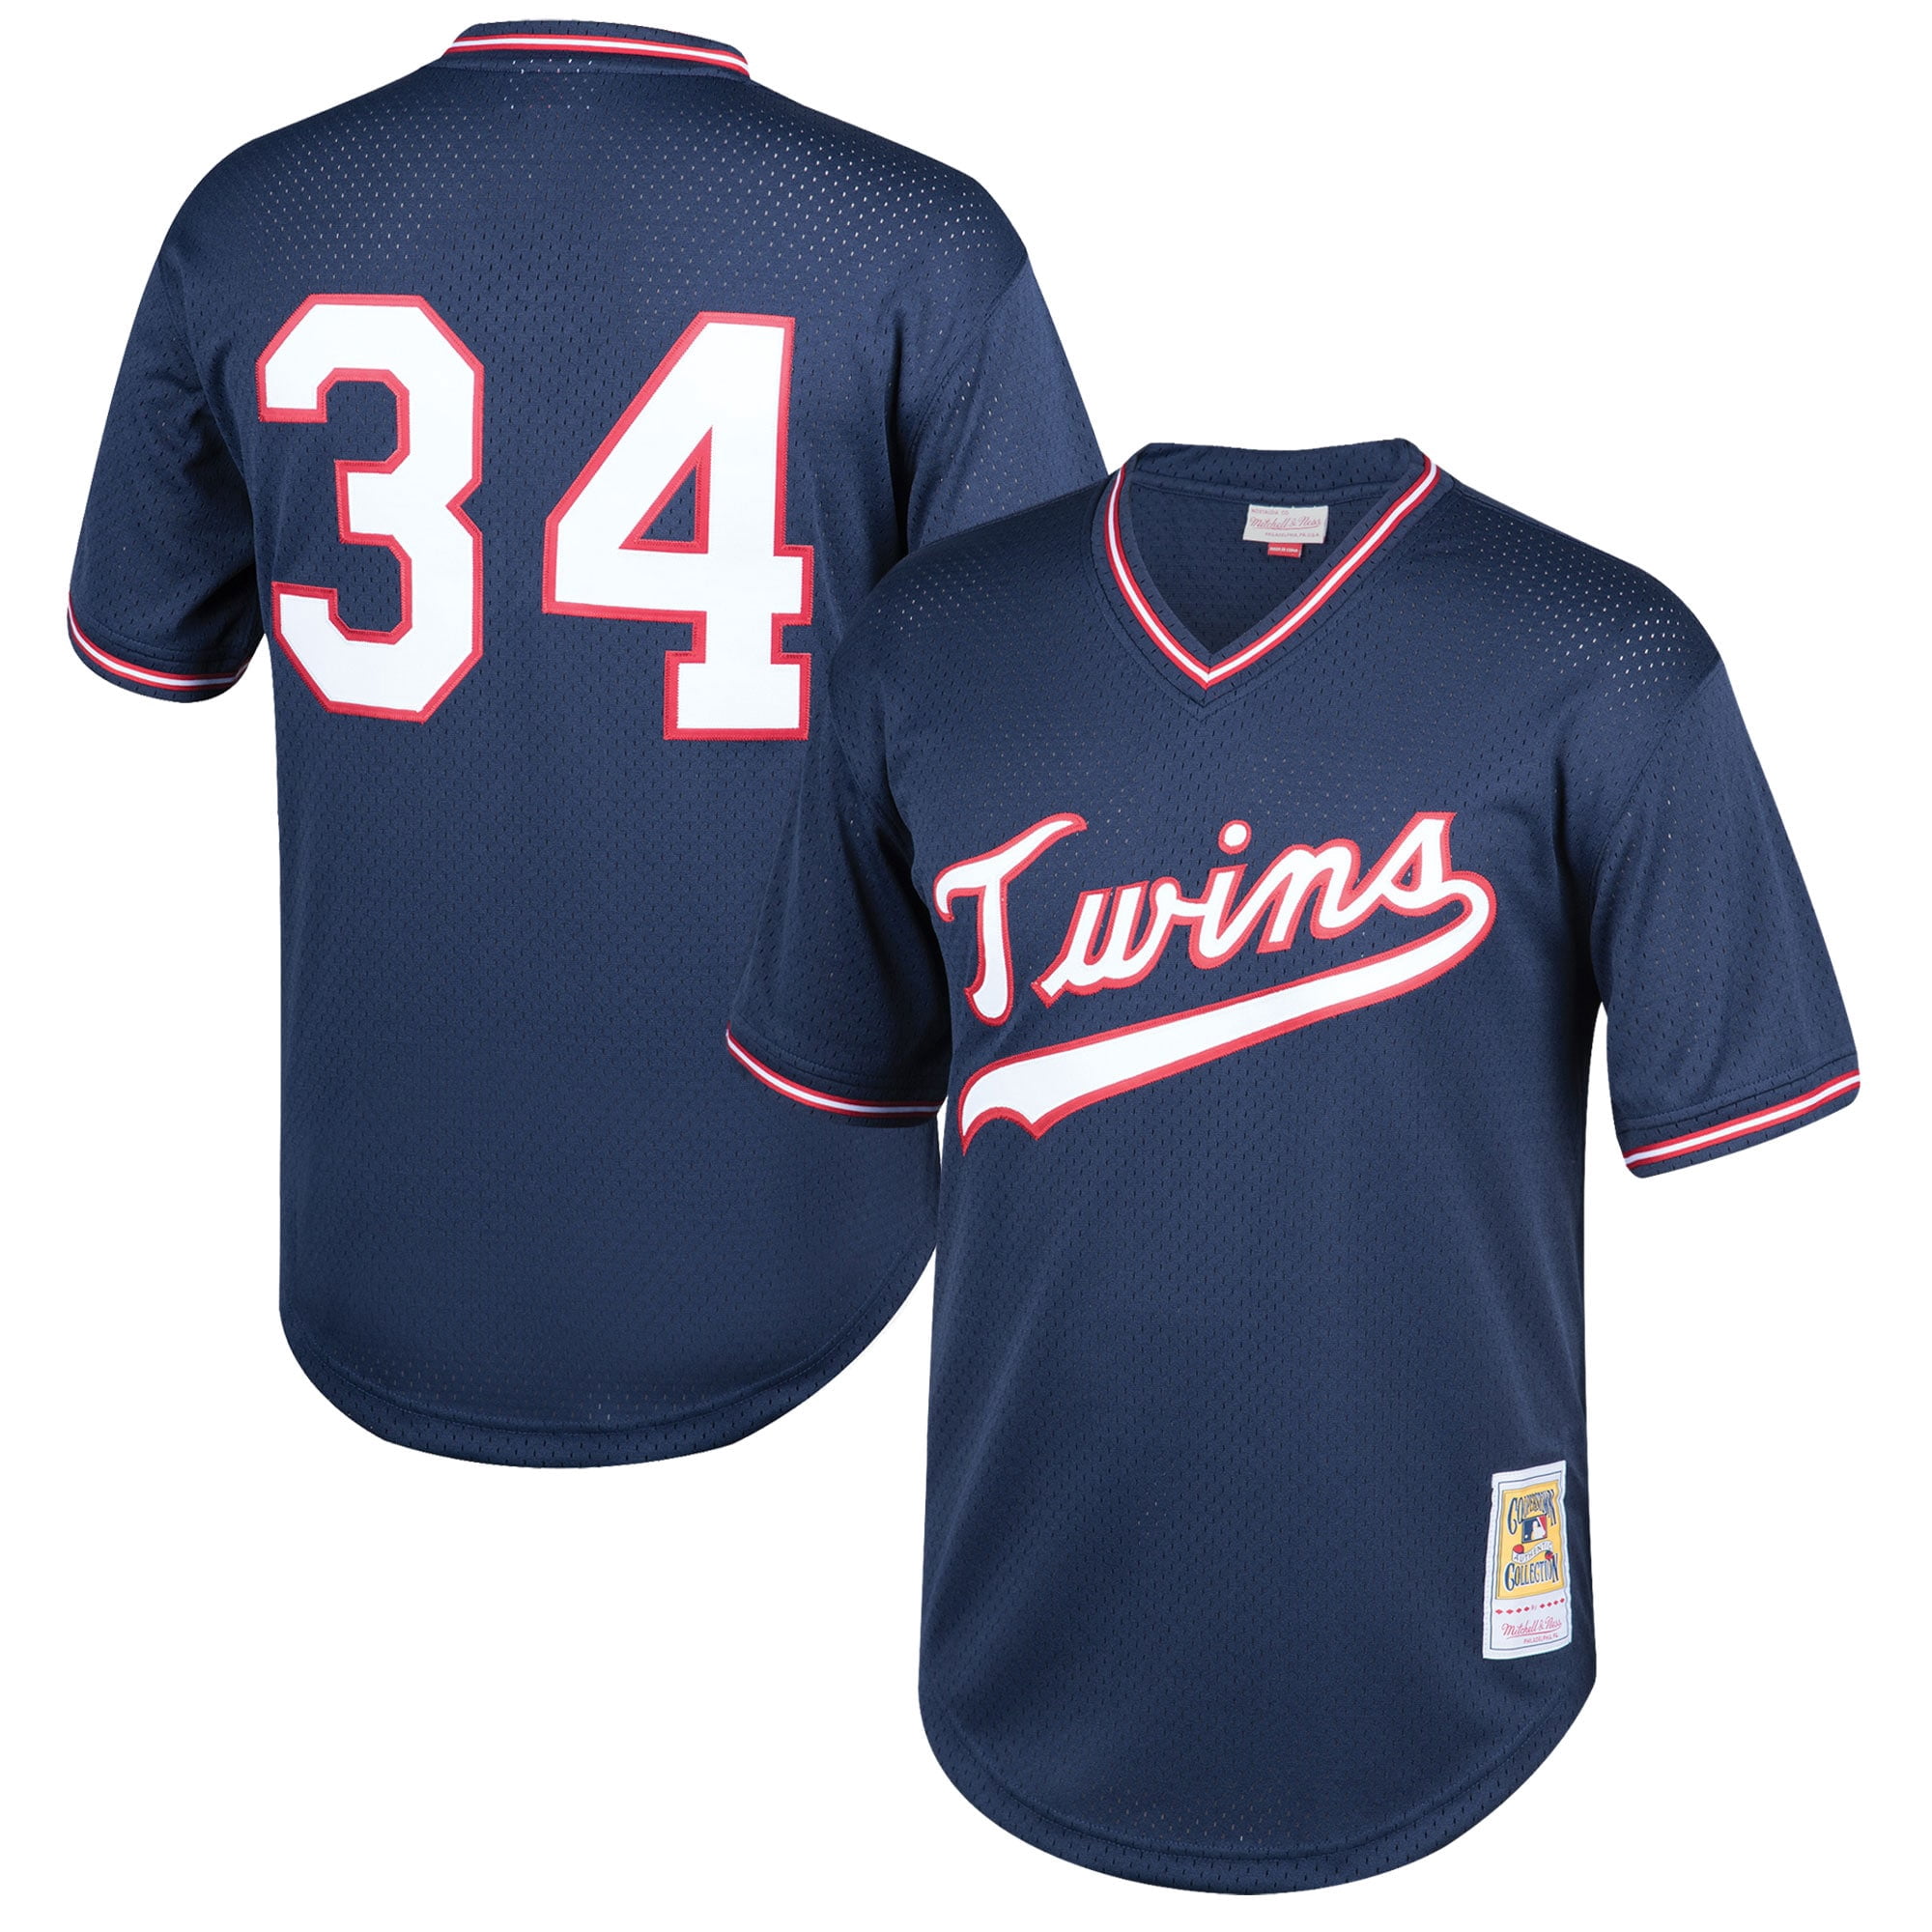 Men's Nike Light Blue Minnesota Twins Cooperstown Collection